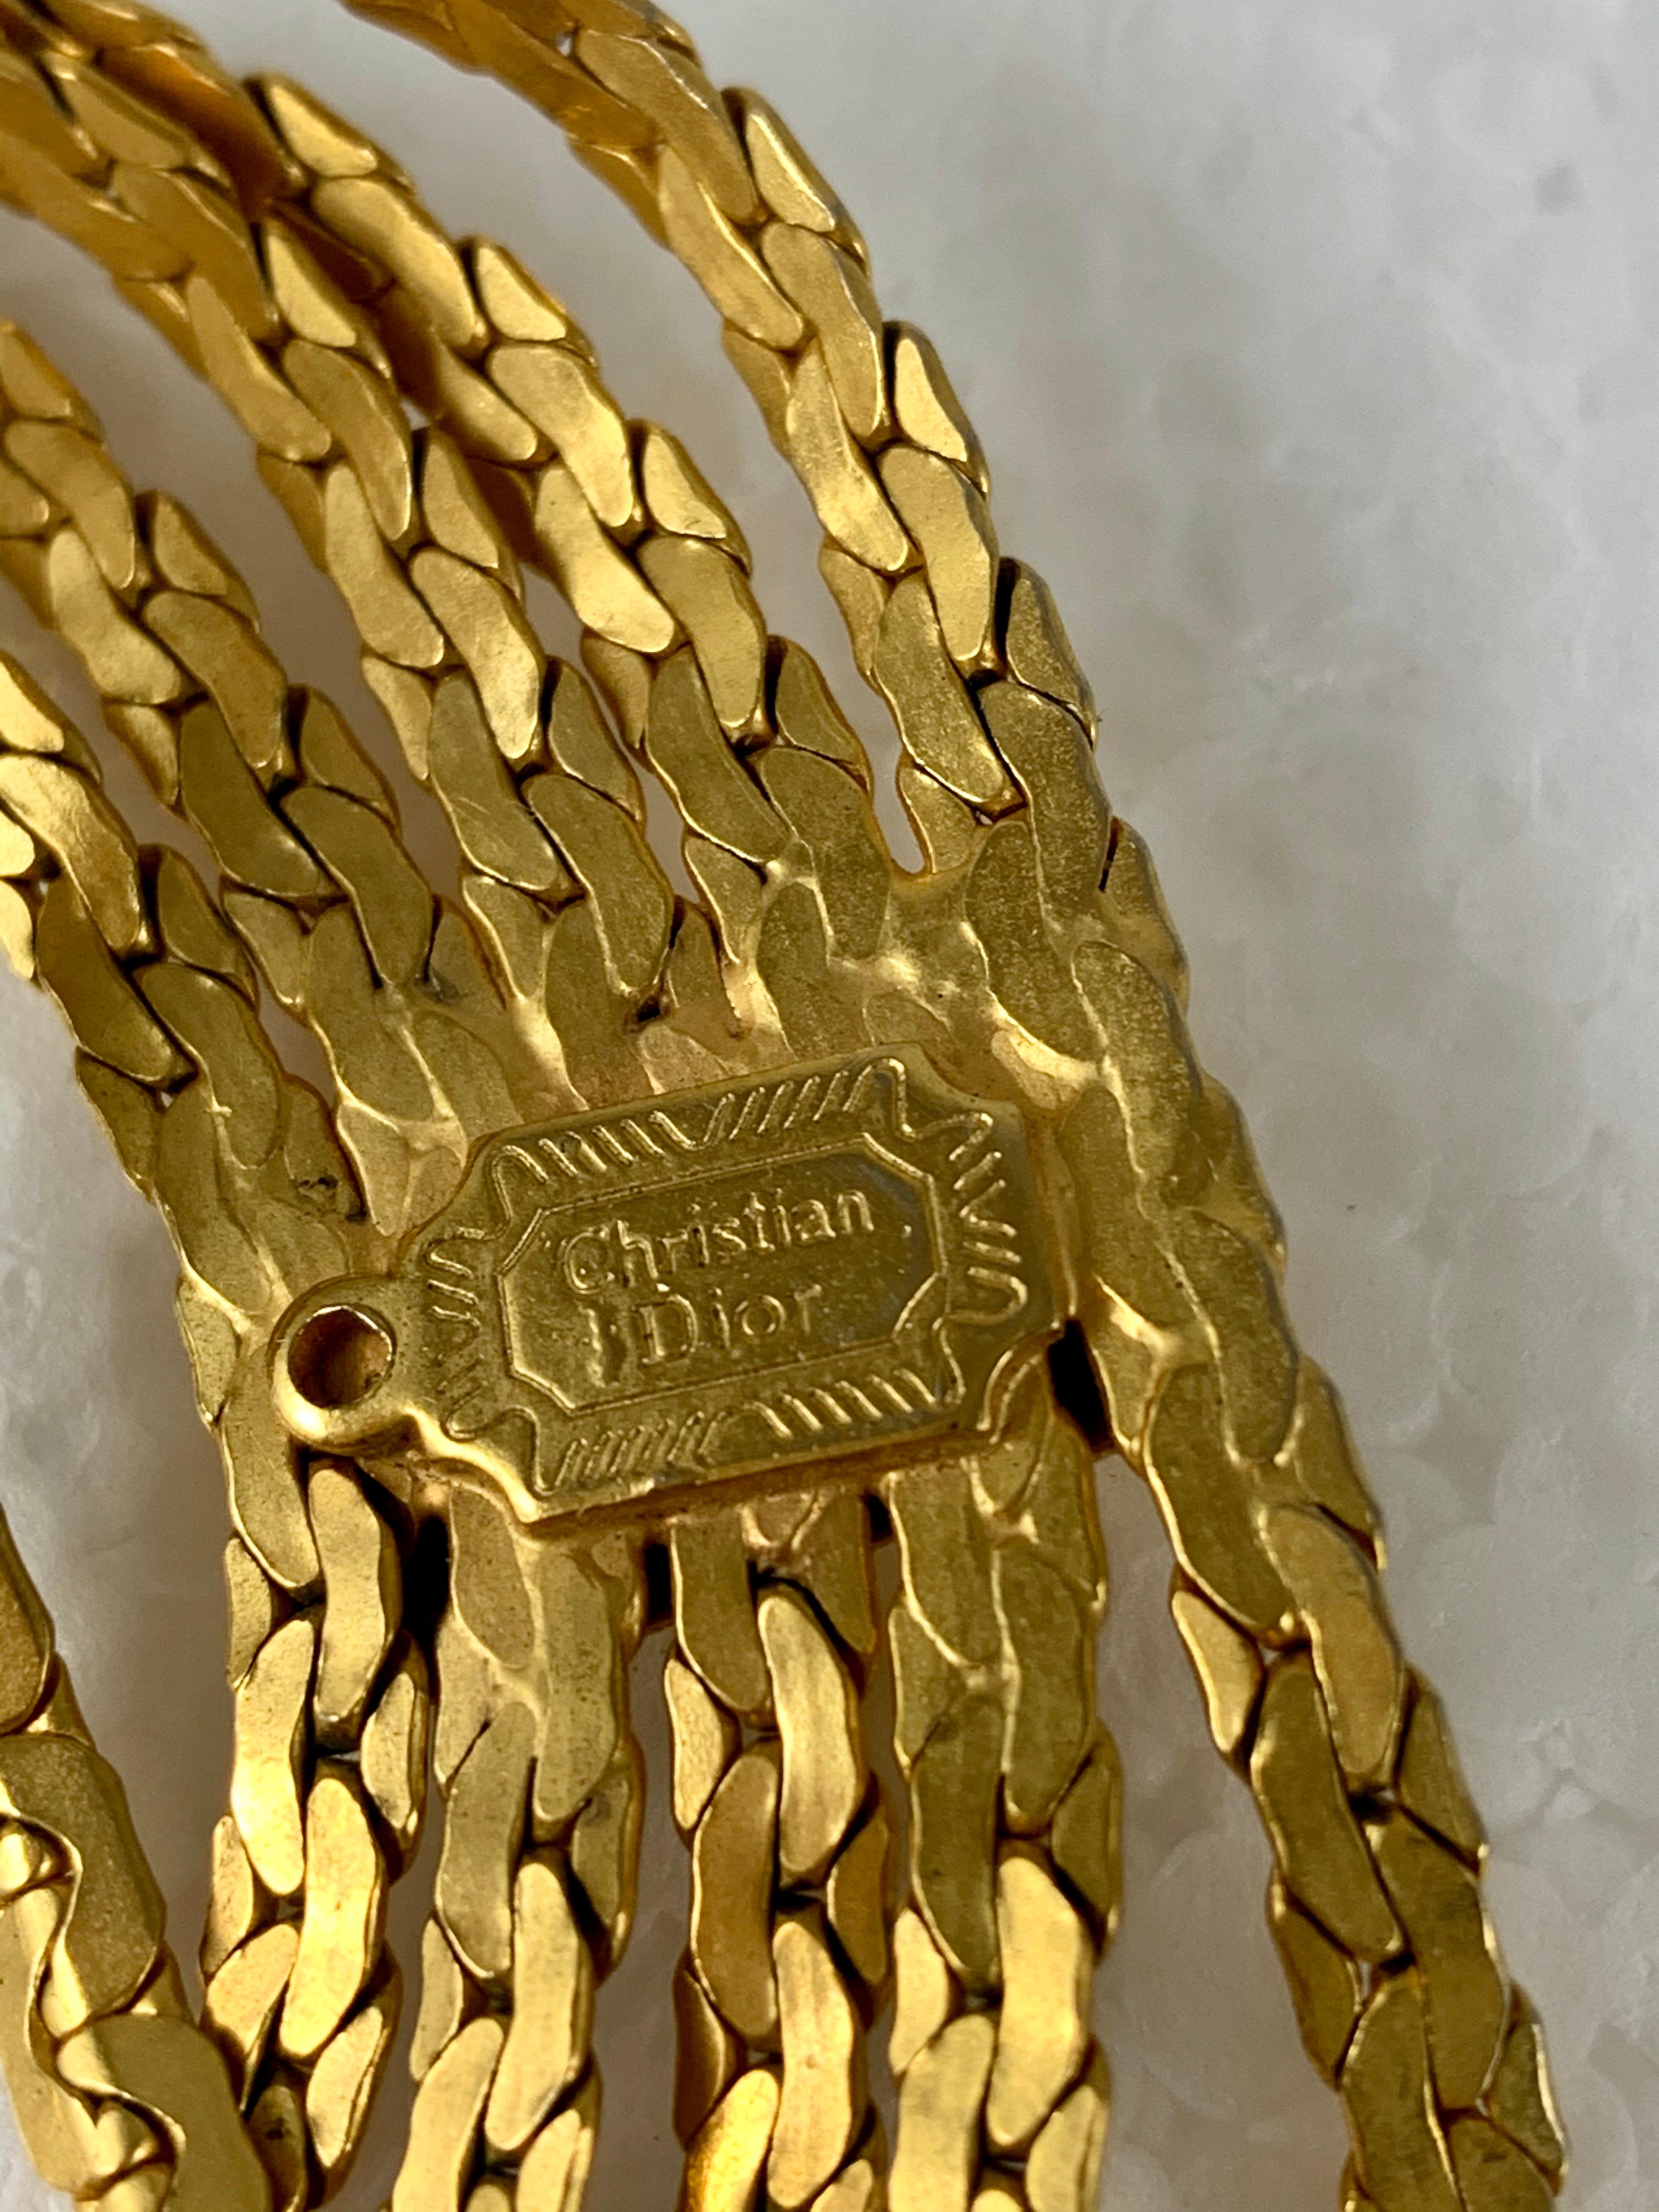 From Christian Dior, France, a 1960s Era belt made of five gold-tone snake chains bound at three intervals with soldered rectangular stations. The chains hang in a graceful swag. The Christian Dior stamped logo is applied to the verso of one